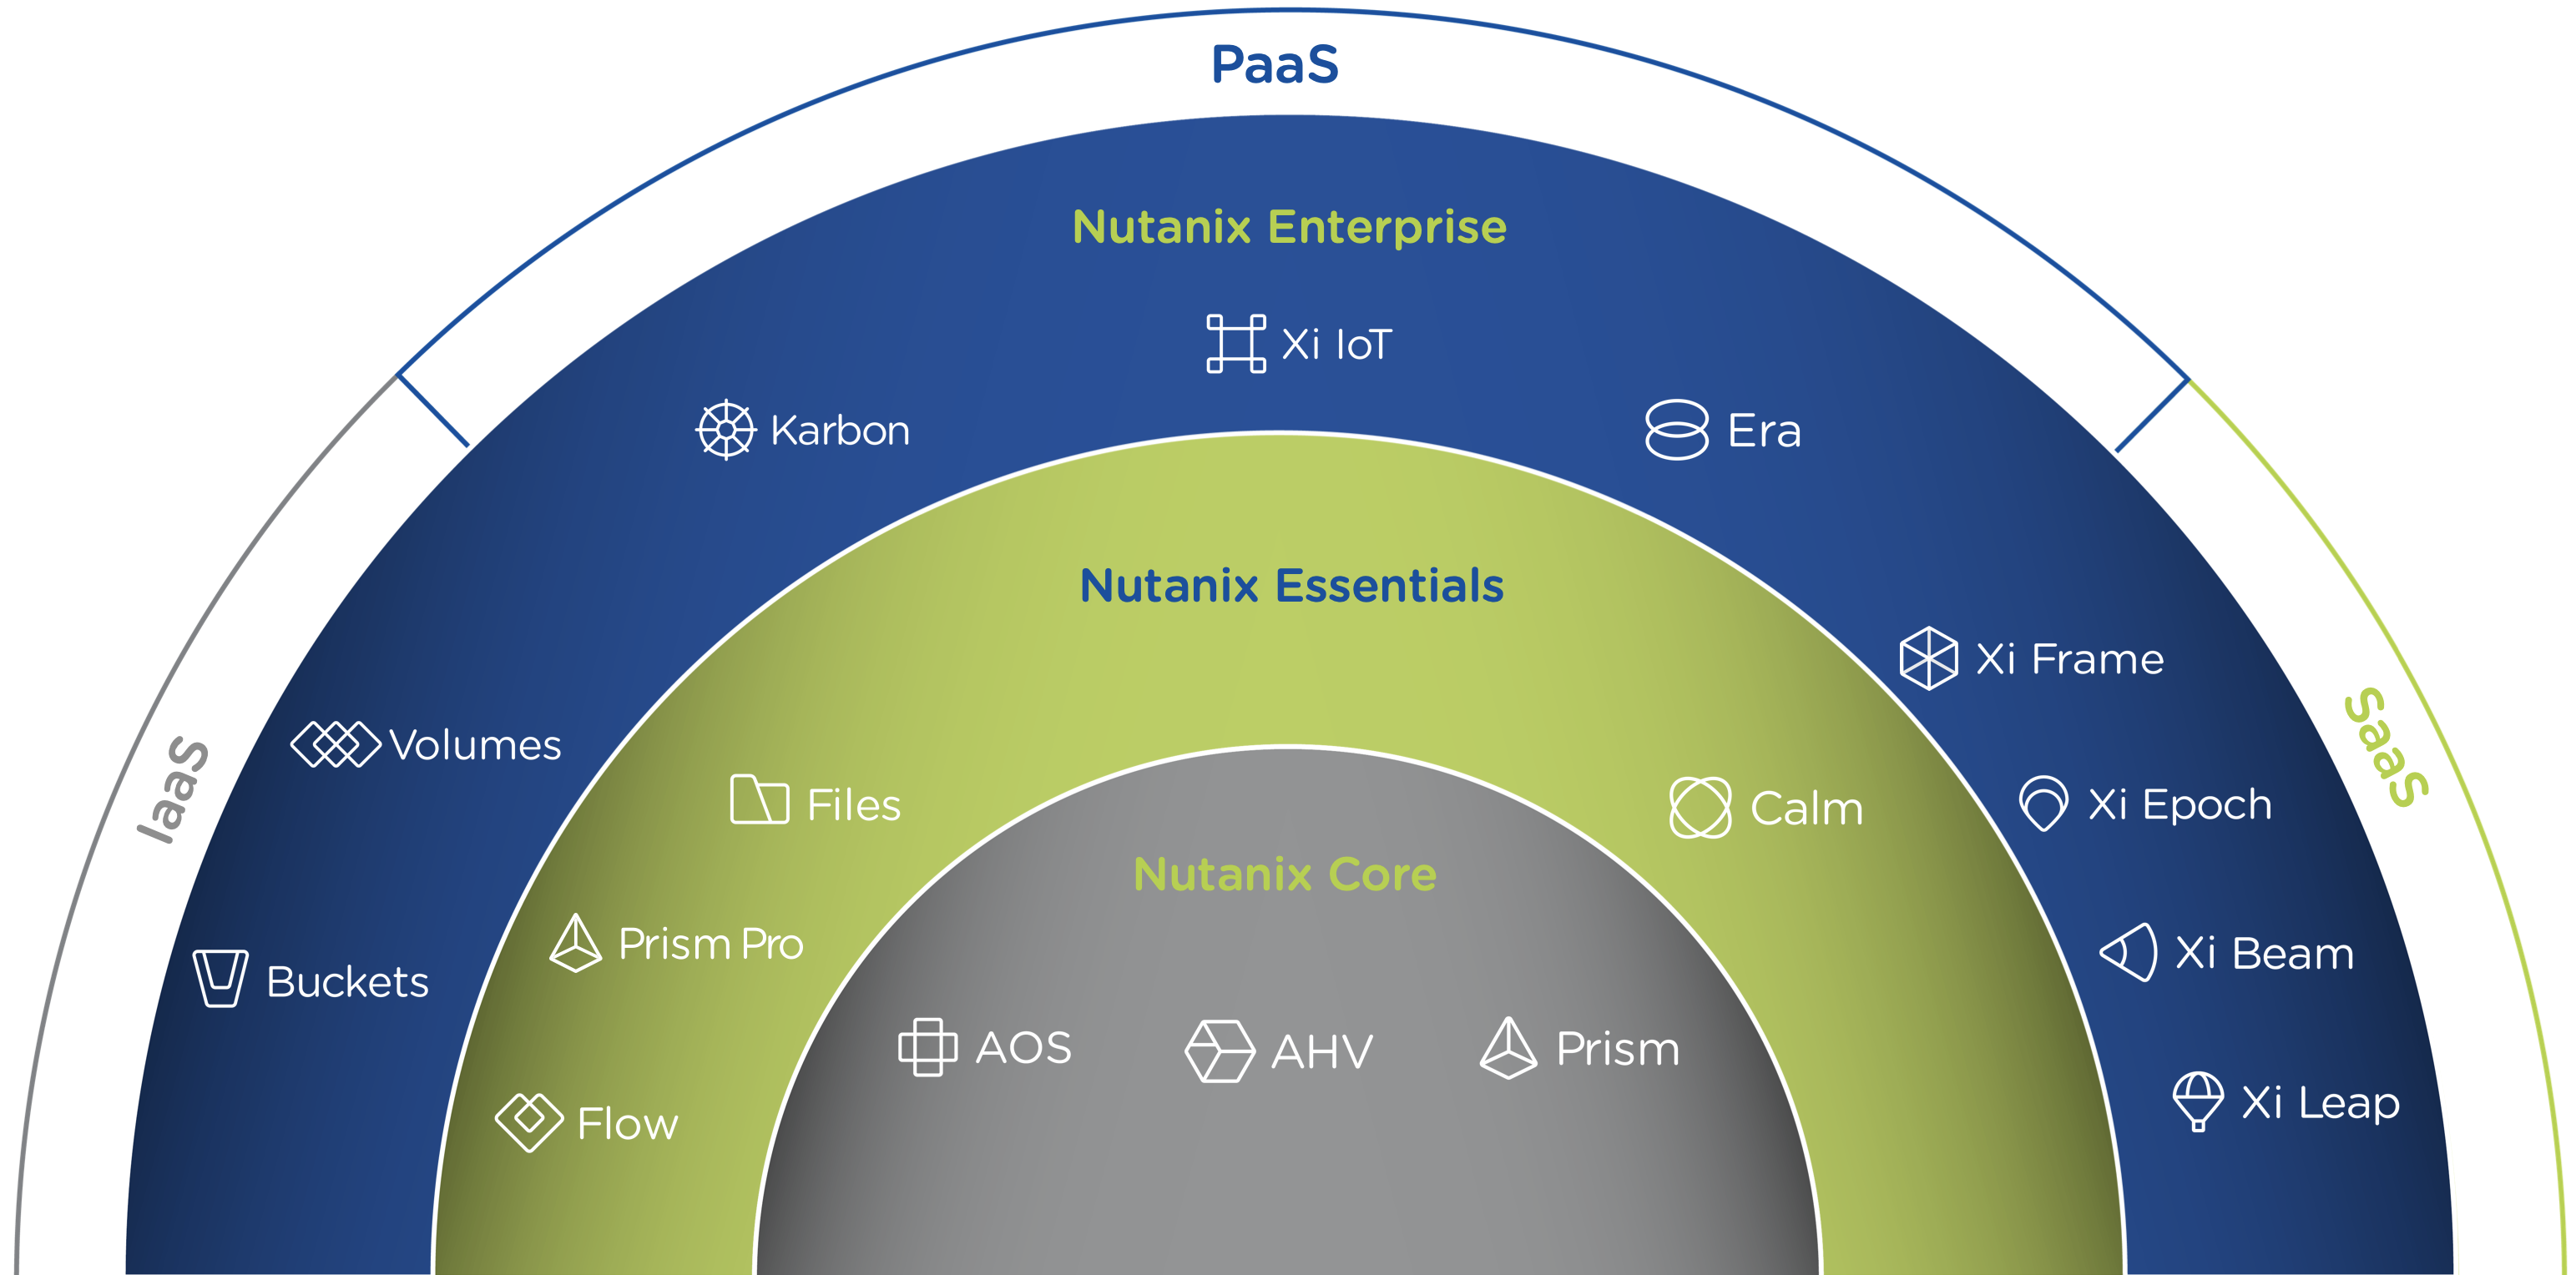 Products Ecosystem - Hybrid Cloud